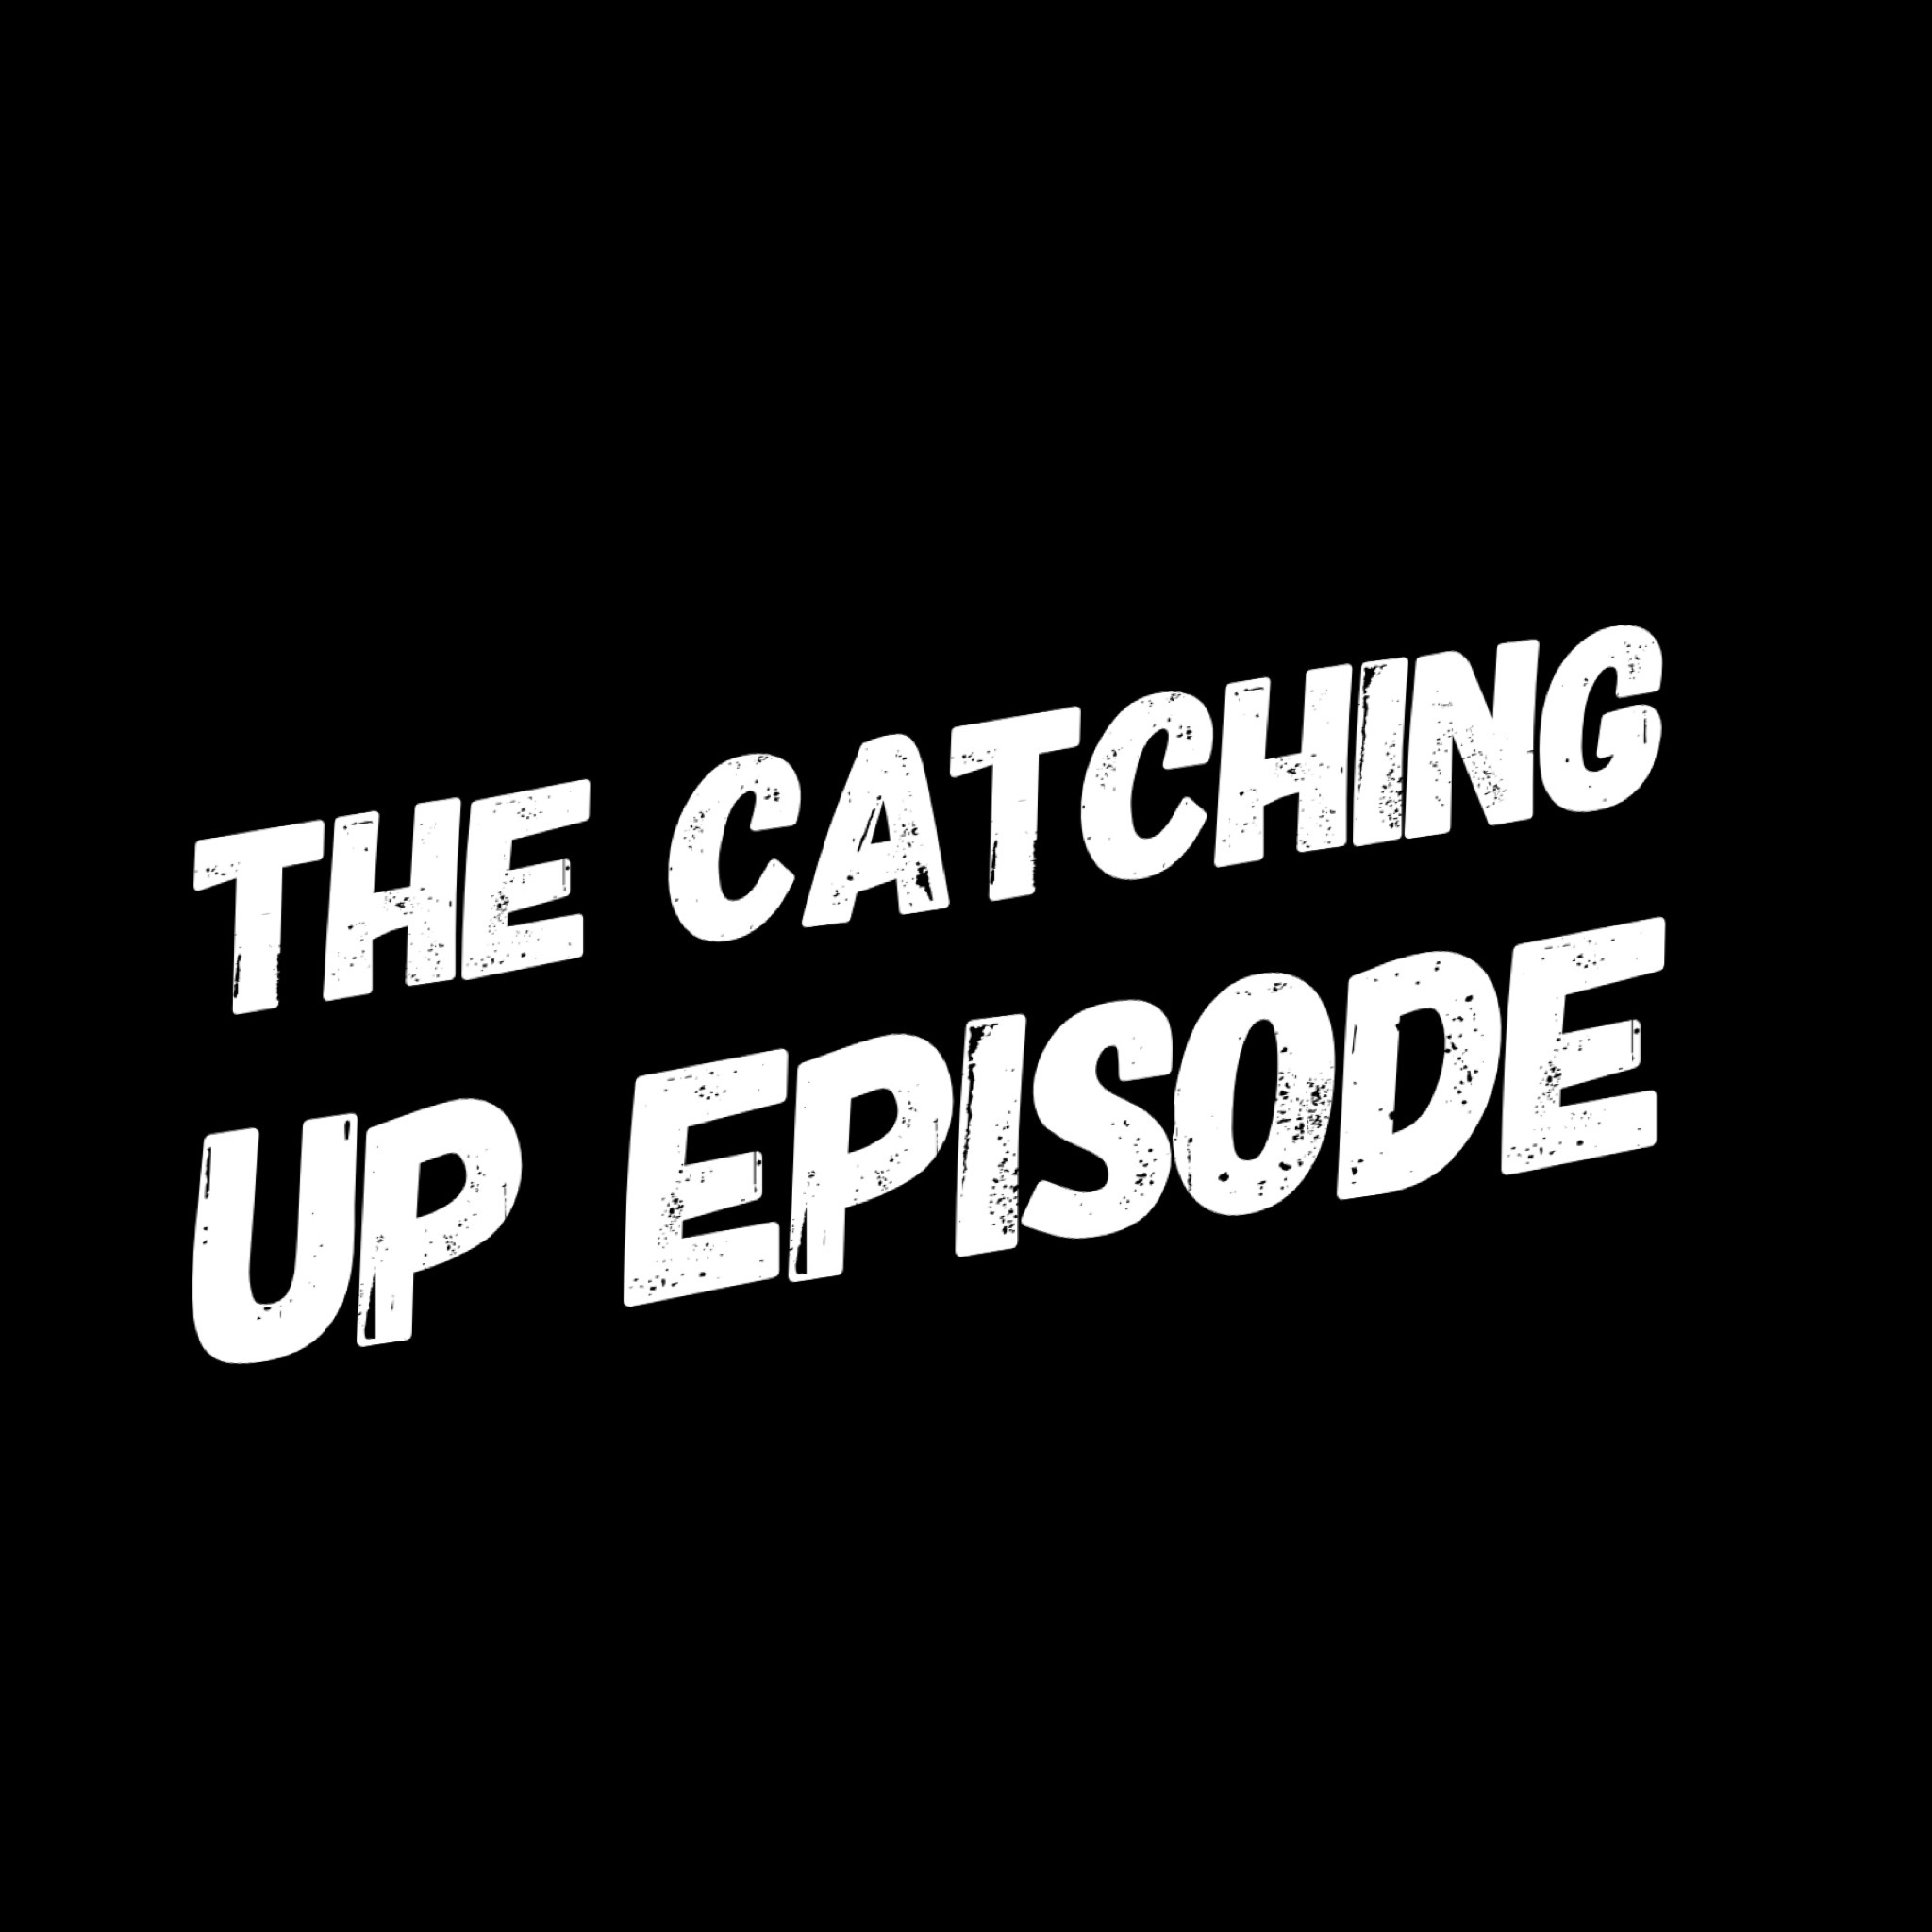 The Catching Up Episode